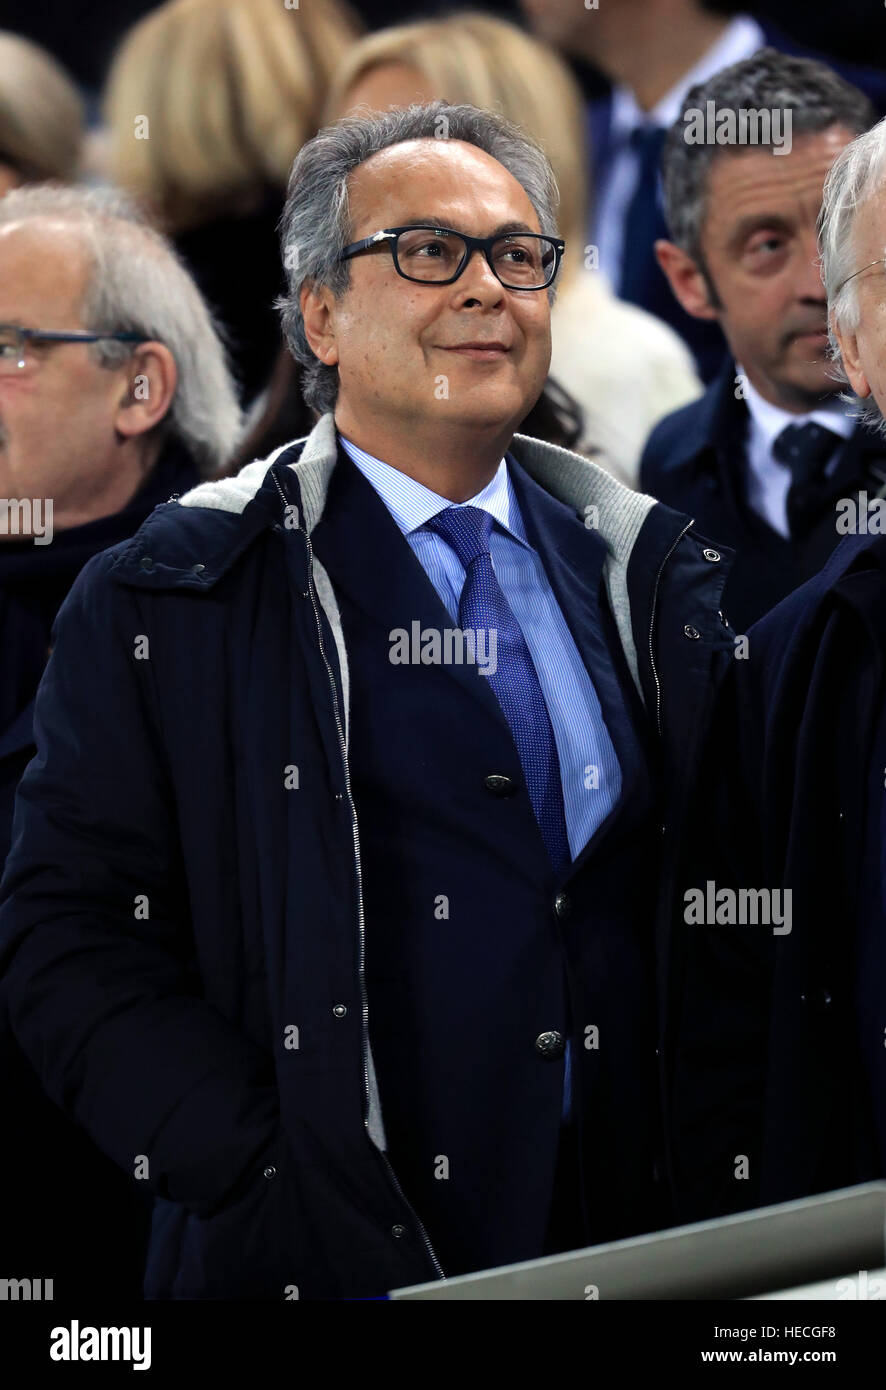 New Everton Chairman Farhad Moshiri in the stands during the Premier League match at Goodison Park, Liverpool. Stock Photo